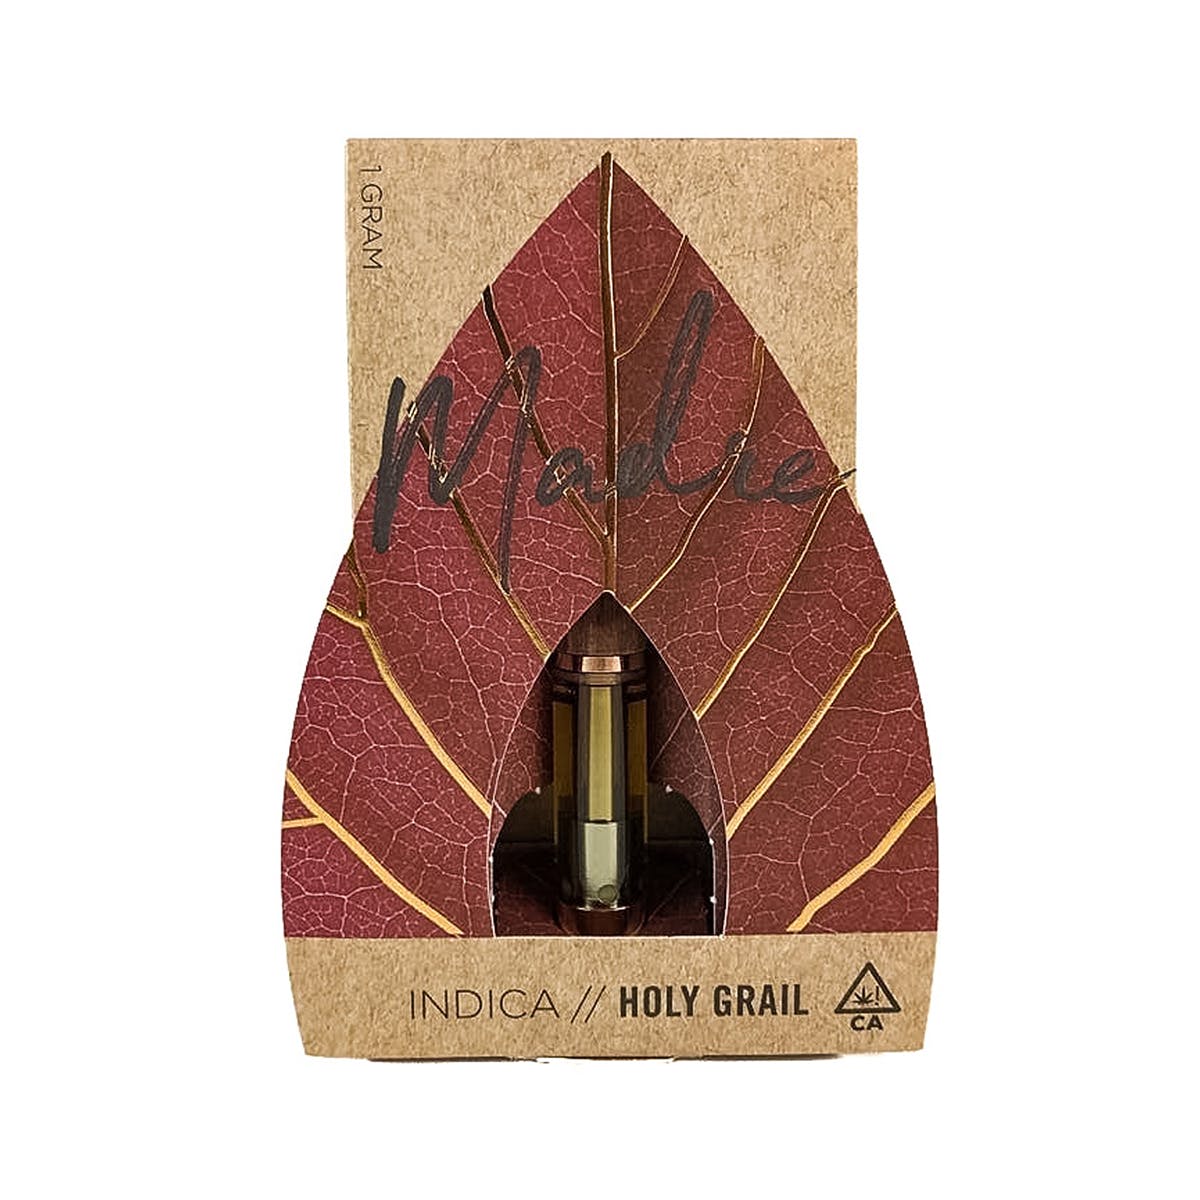 marijuana-dispensaries-mr-steal-your-patients-2419-cap-in-whittier-holy-grail-madre-organic-cartridge